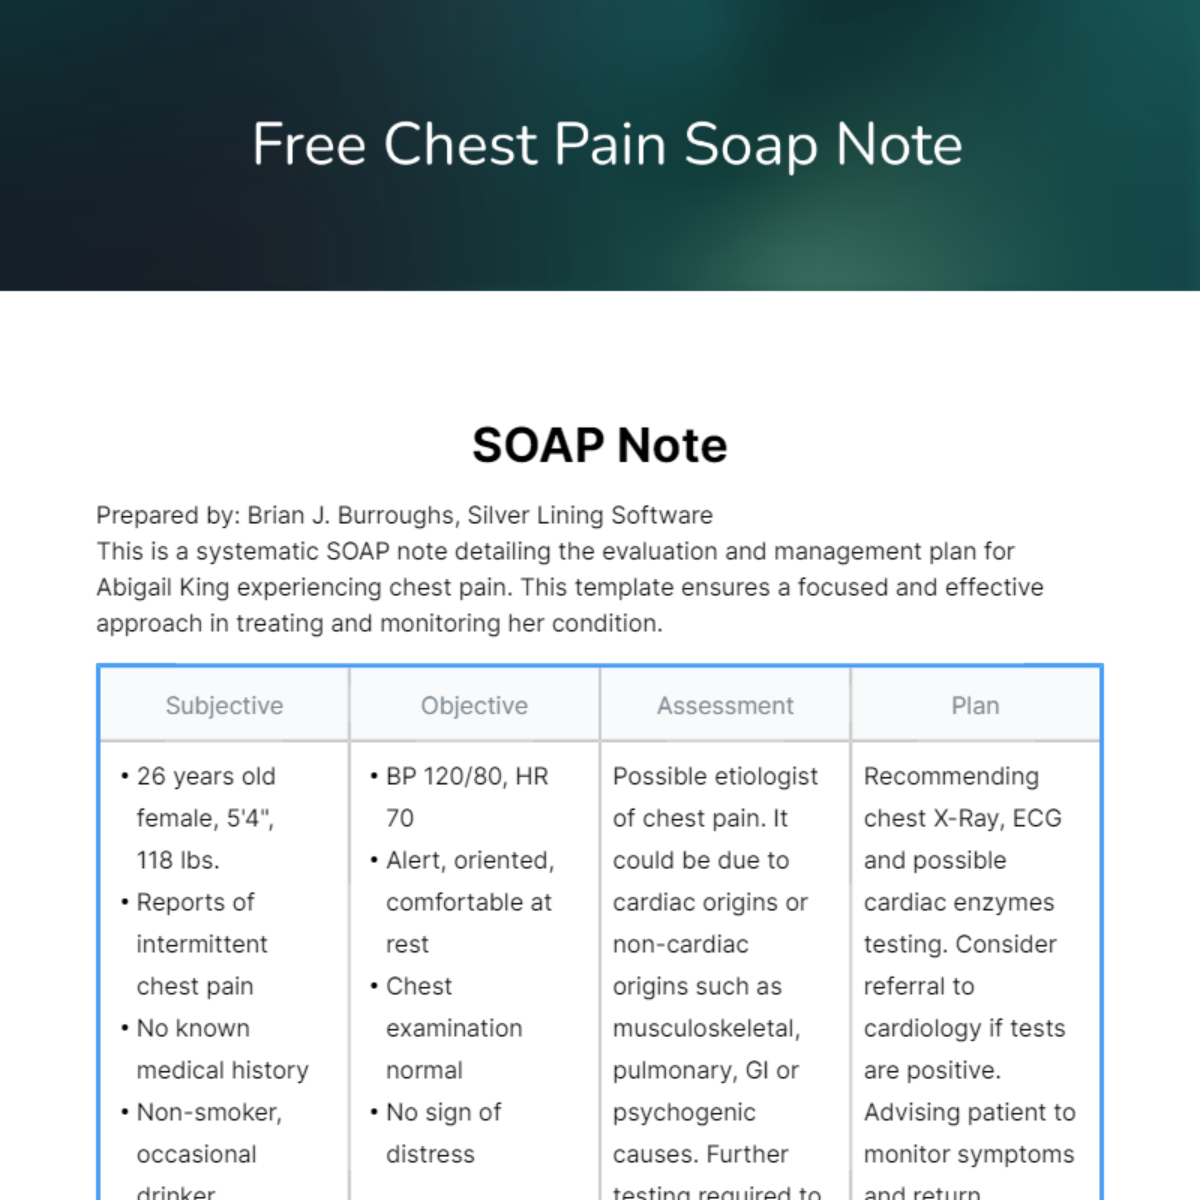 Free Chest Pain Soap Note Template